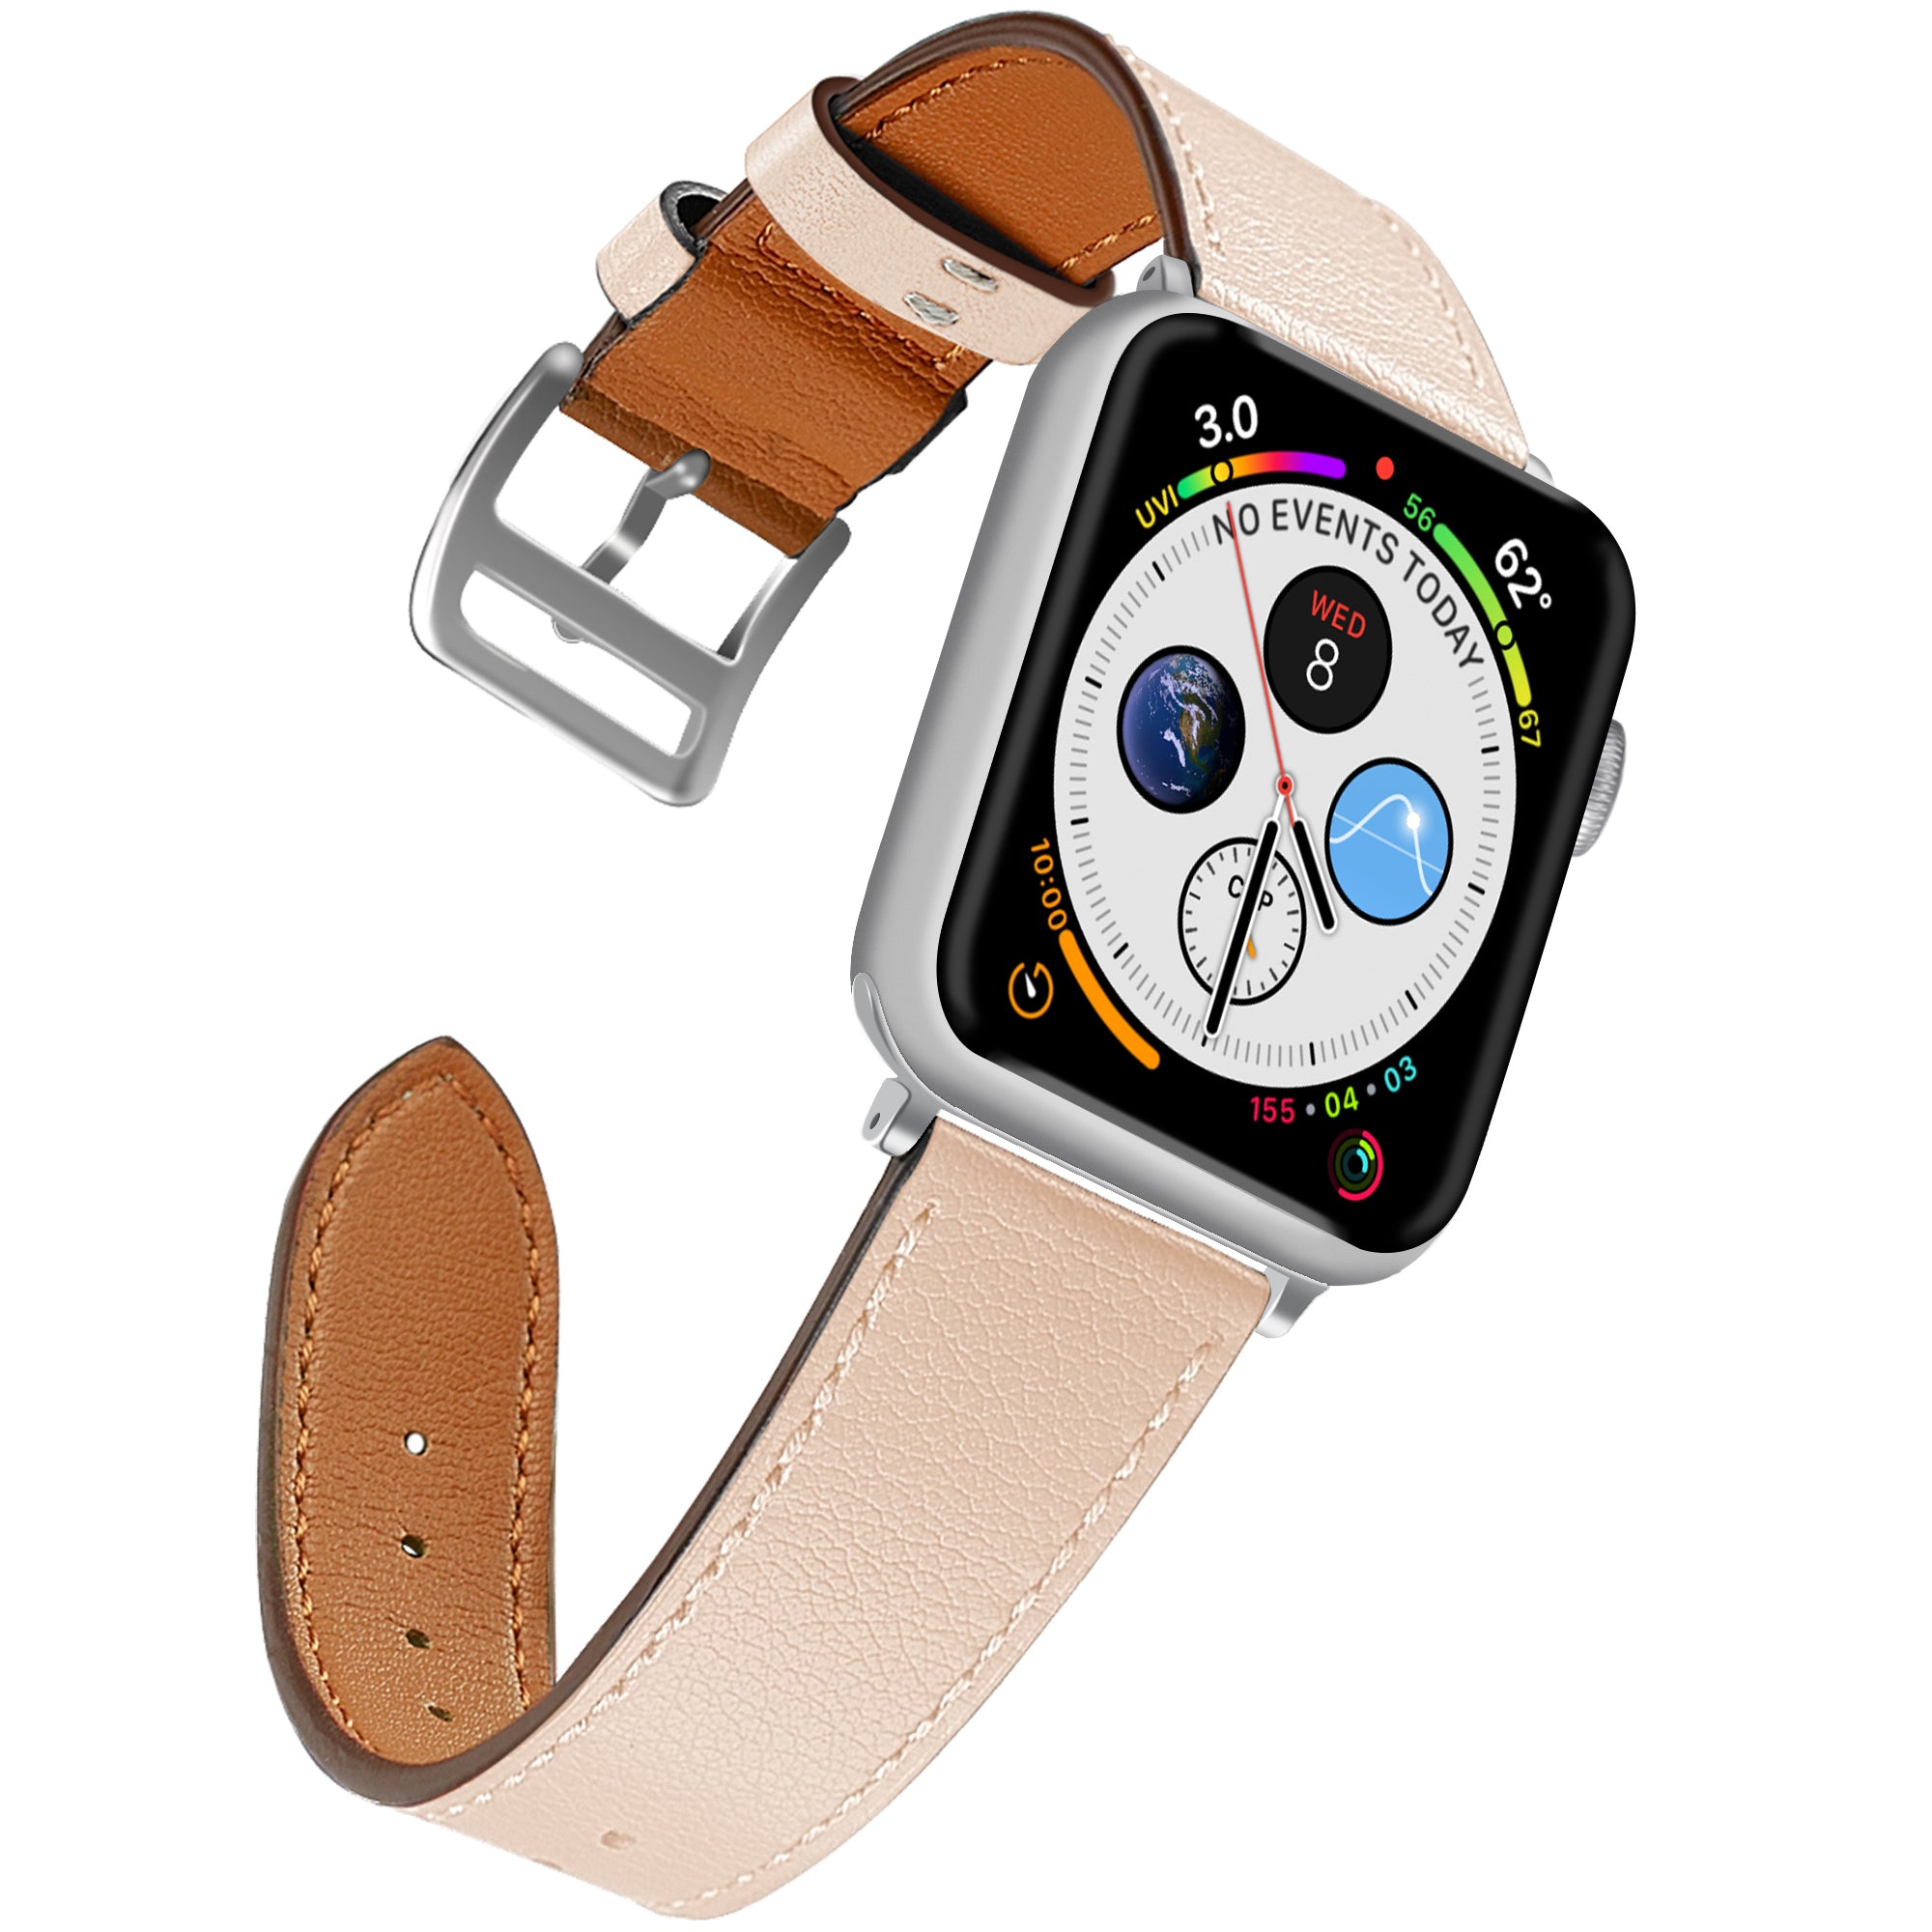 Homepage  Leather watch bands, Apple watch bands leather, Watch bands